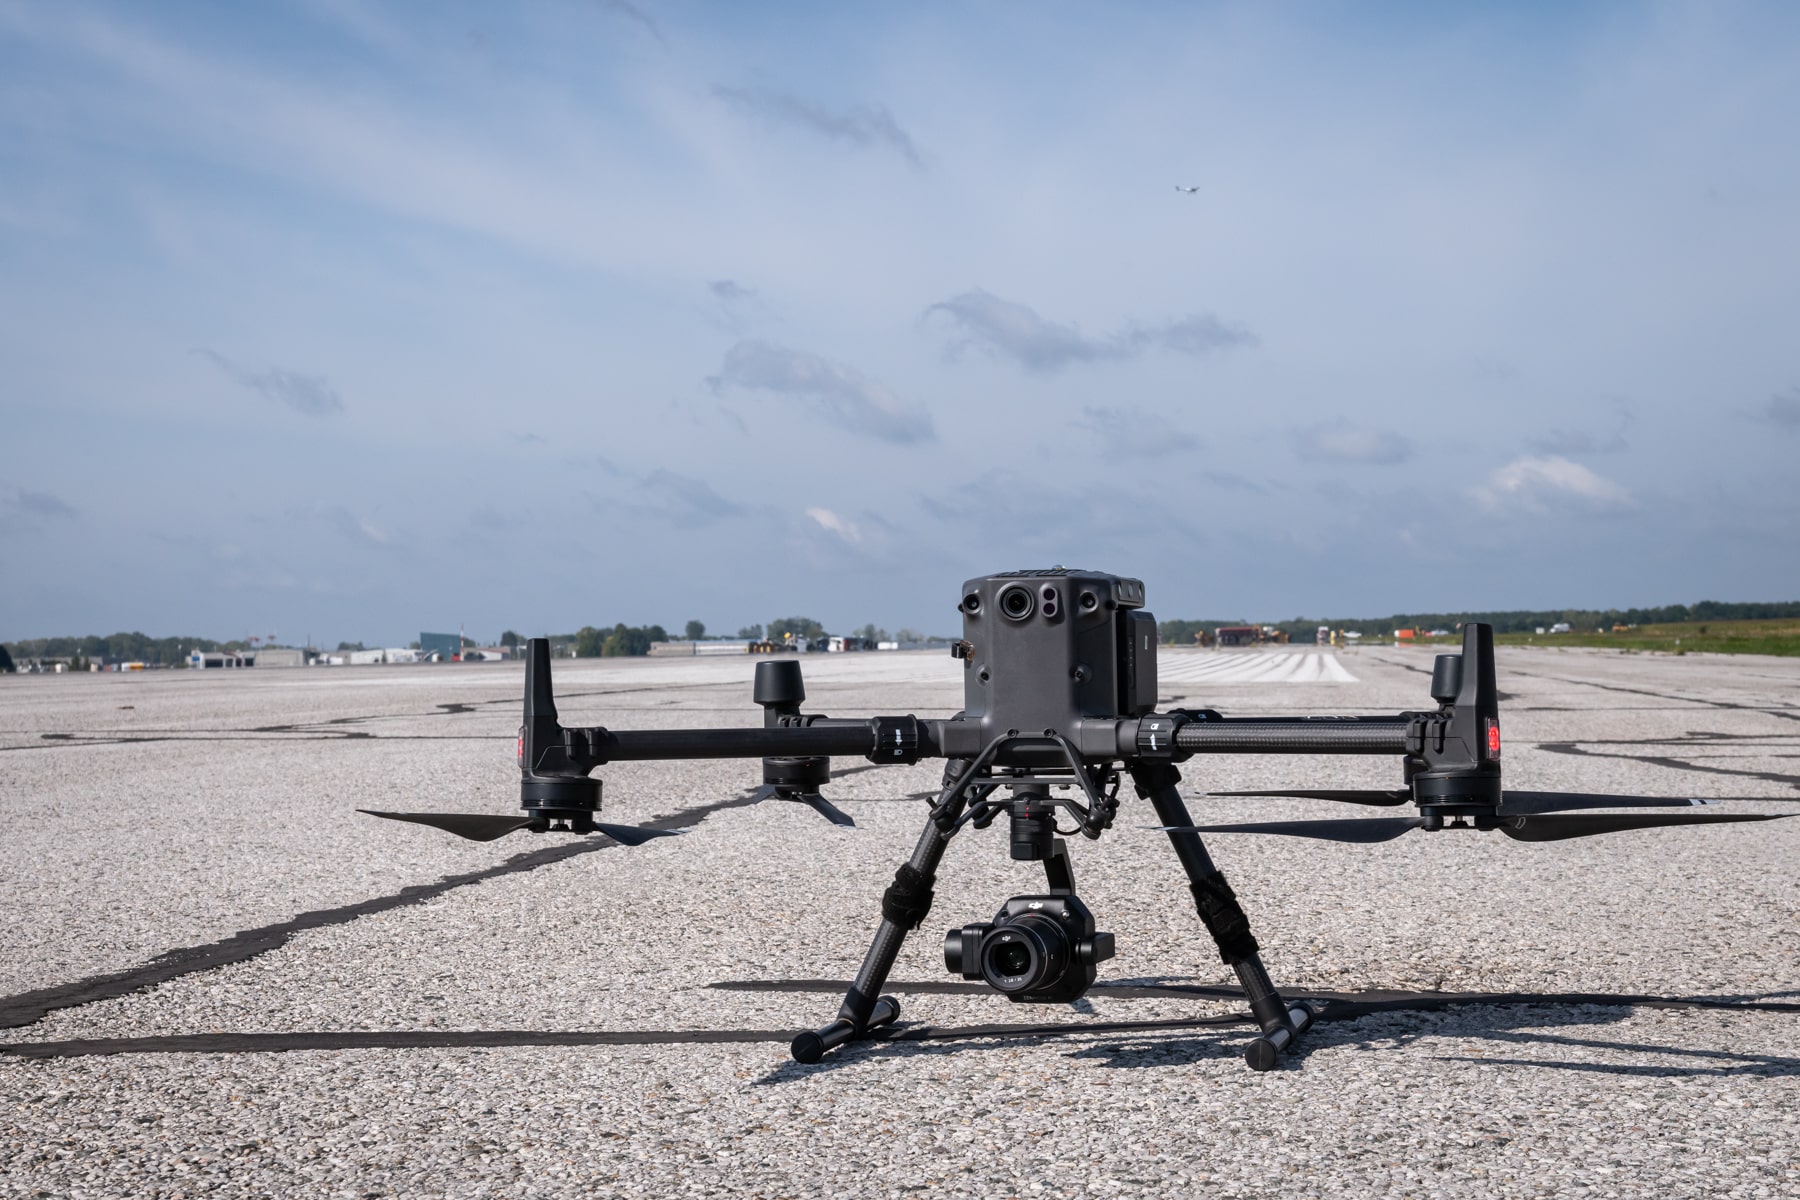 drone on tarmac during runway inspection